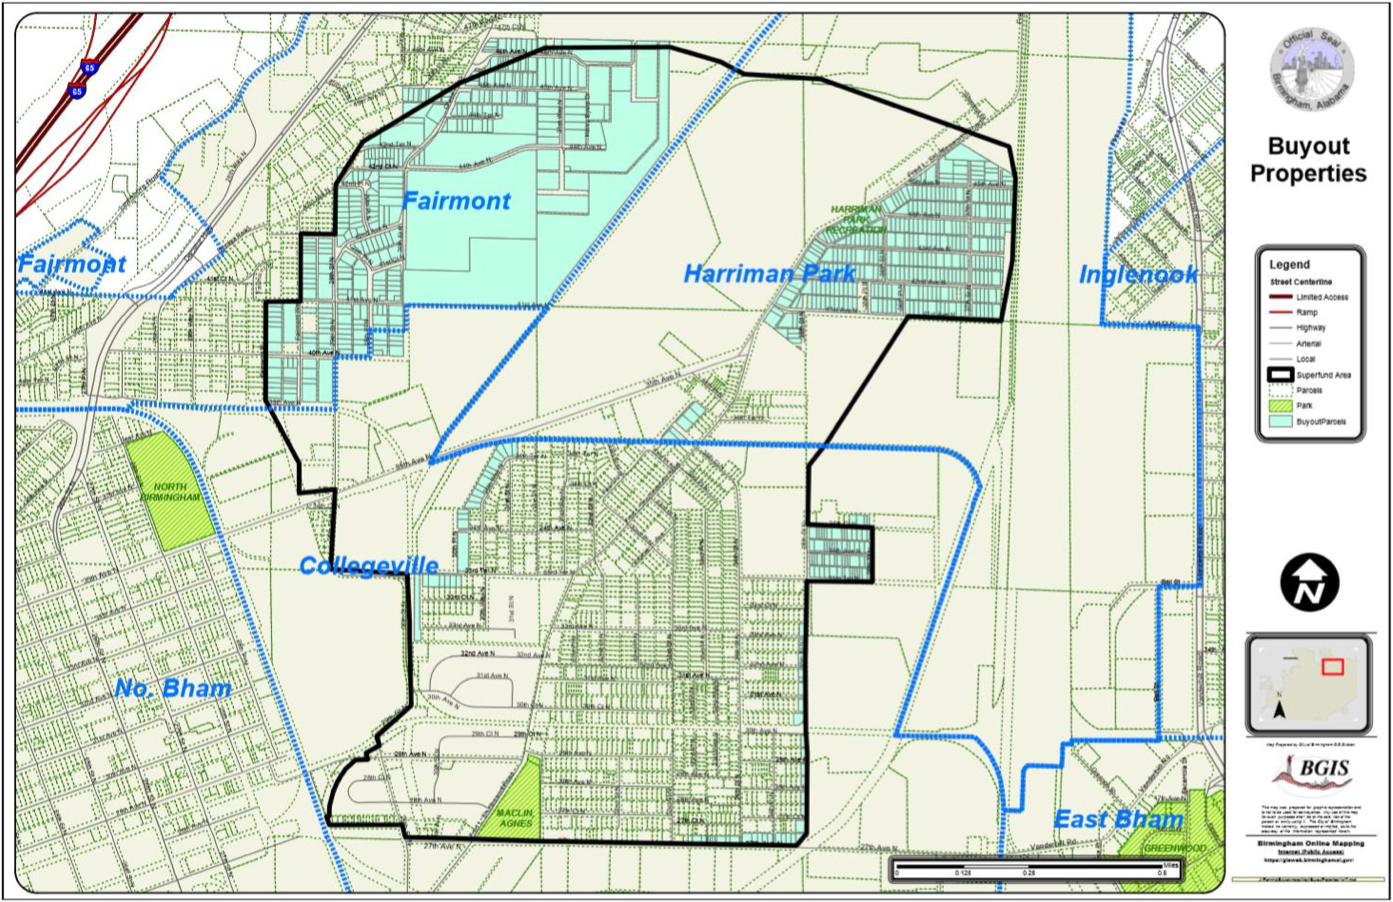 The map of the portion of north Birmingham where residents would be eligible for buyouts in the leaked “Big Ask” plan. Only owners of the properties shaded light blue would qualify for buyout offers. Credit: City of Birmingham document obtained by ProPublica